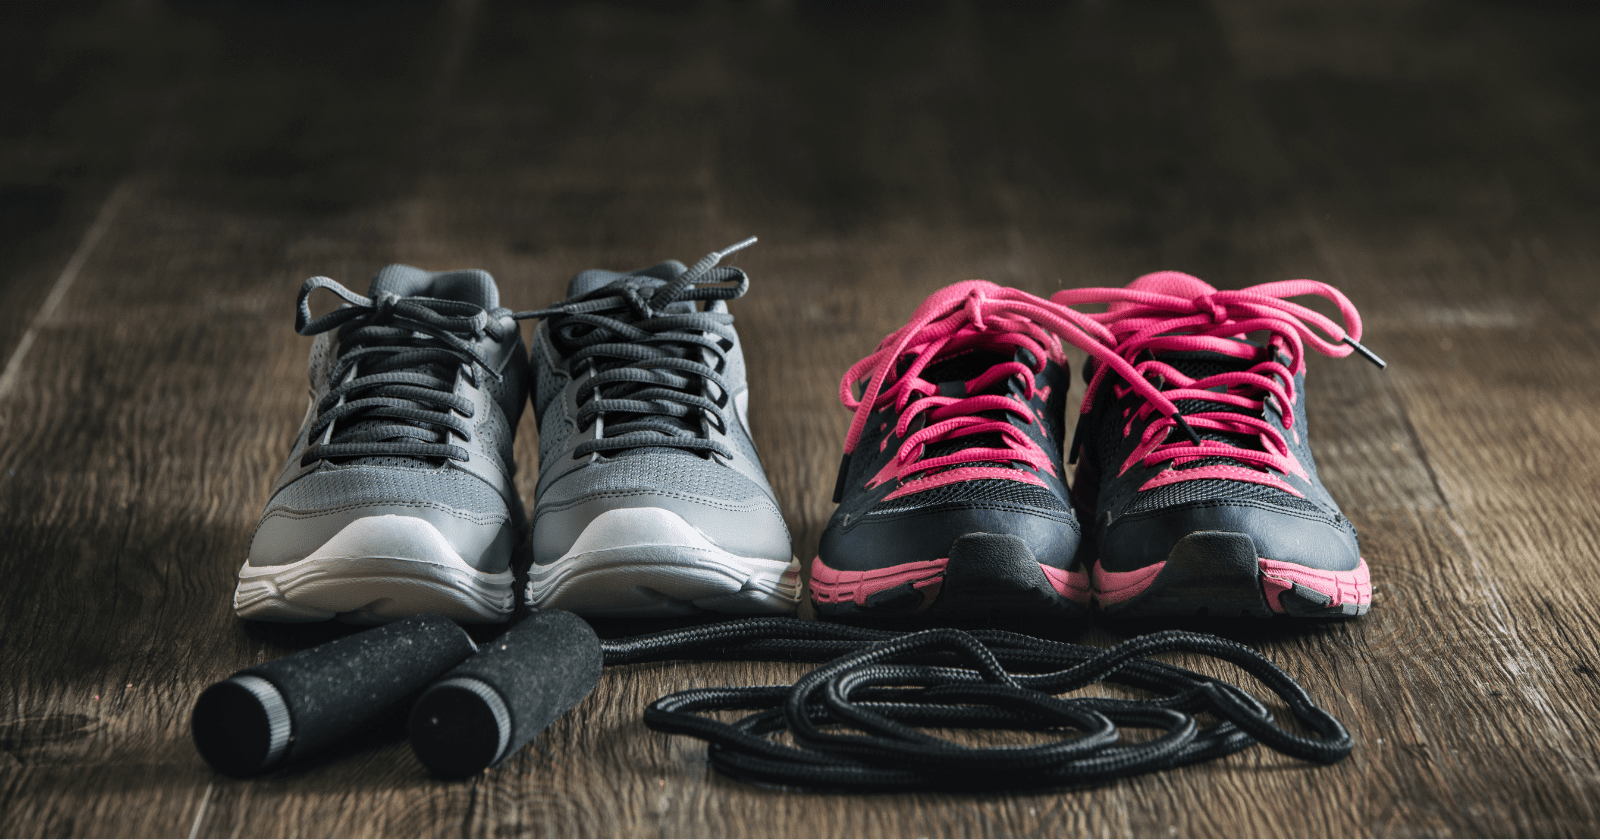 Photo shows two pairs of gym shoes and a skipping rope.